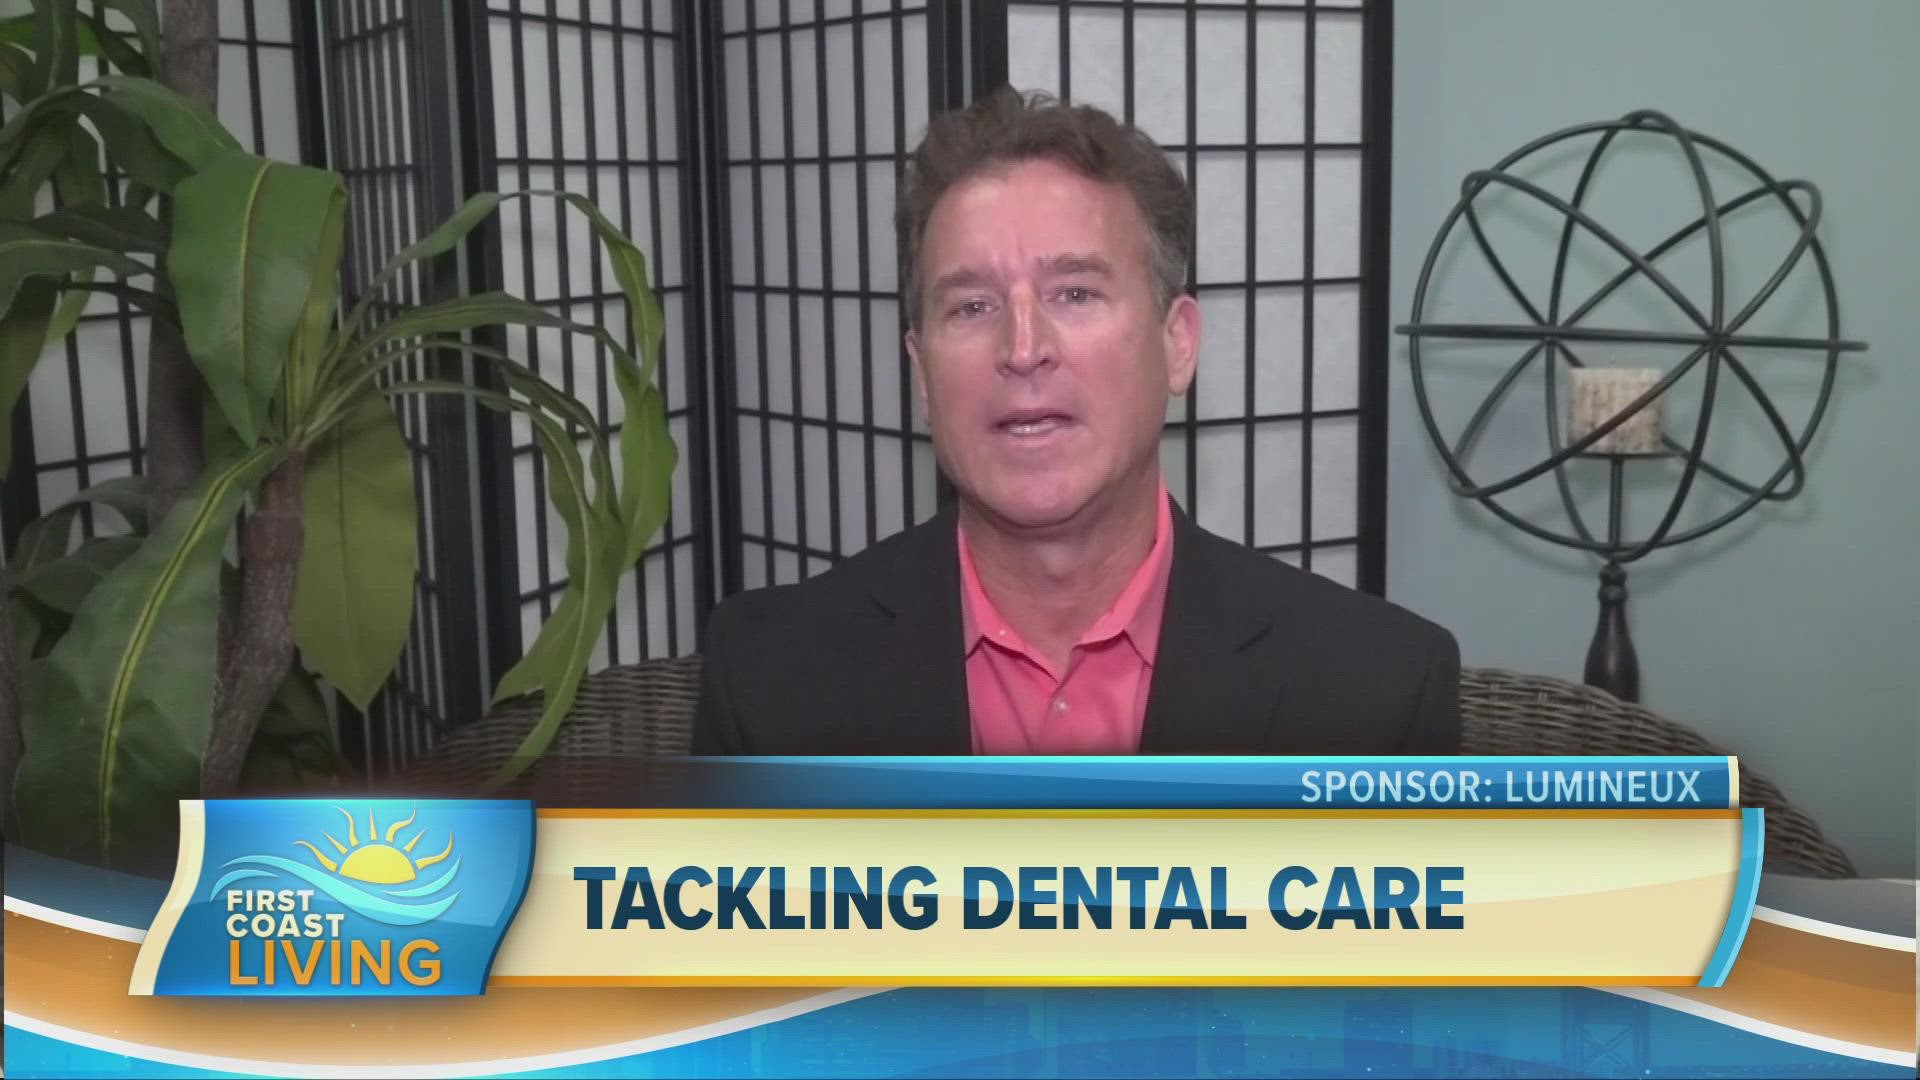 Award-winning Cosmetic Dentist and Best-selling Author Dr. Kourosh Maddahi joins us with ways to keep your oral care top notch to stay healthy.